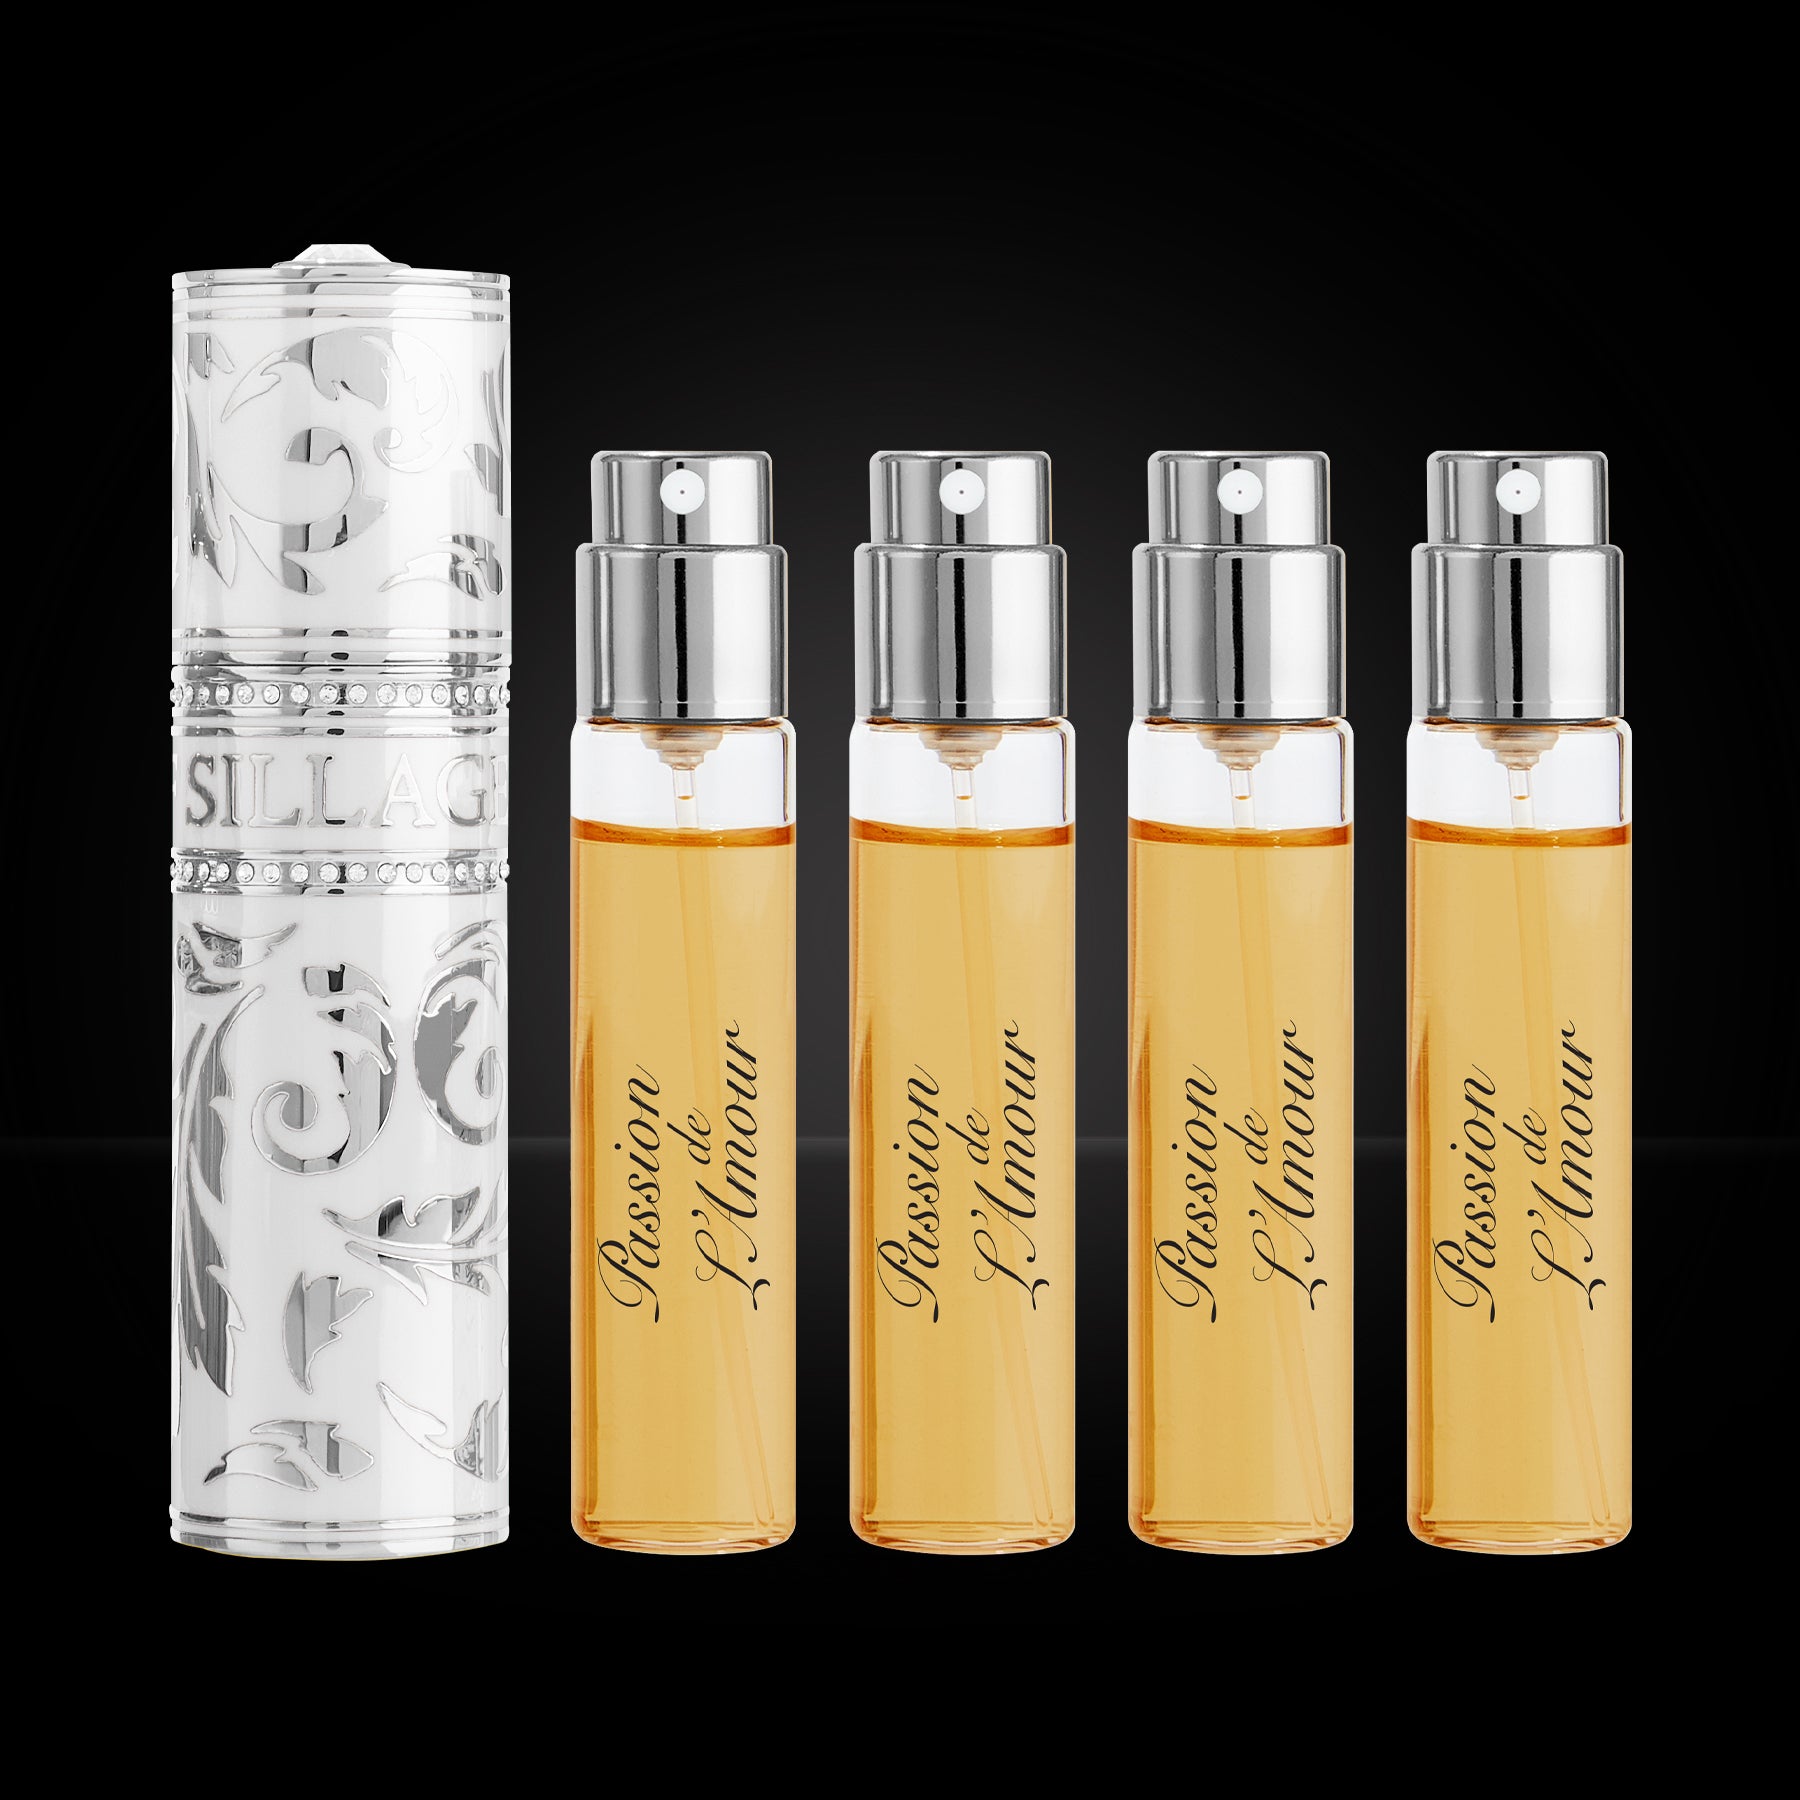 Travel Spray Attrape-Rêves - Perfumes - Collections